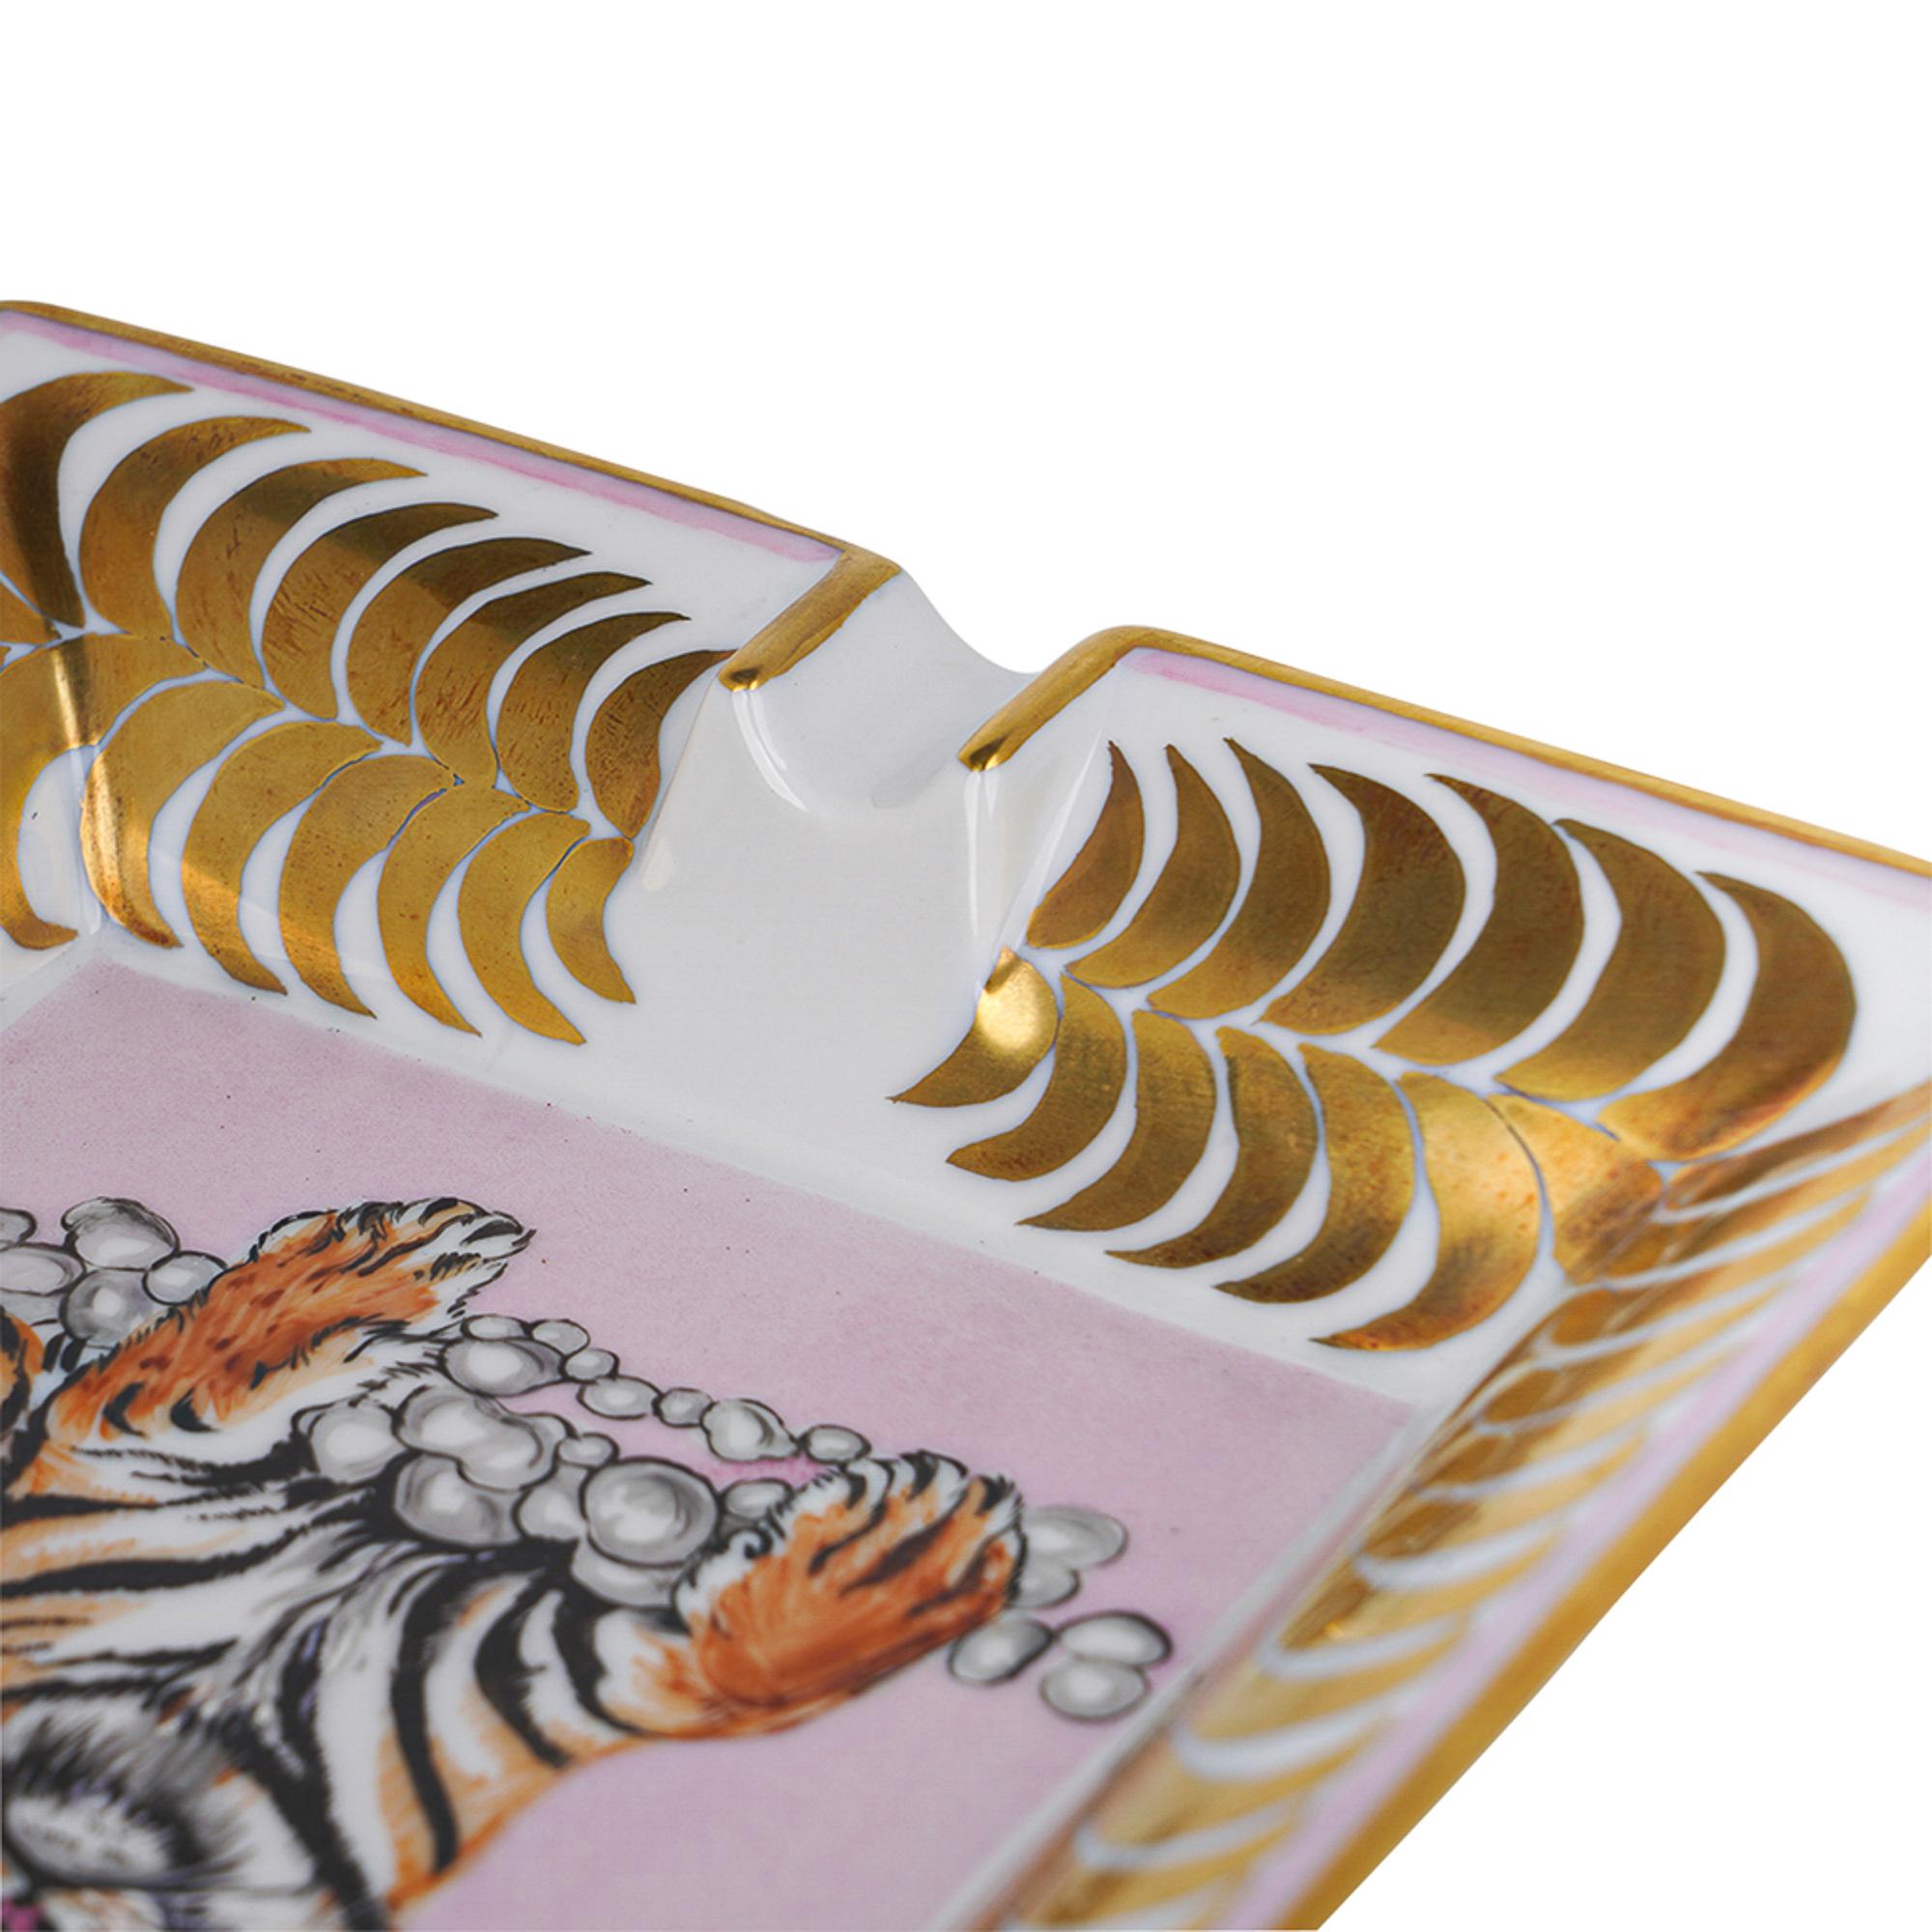 Hermes Change Tray Tigre Royal Or / Rose Hand Painted New w/ Box For Sale 1